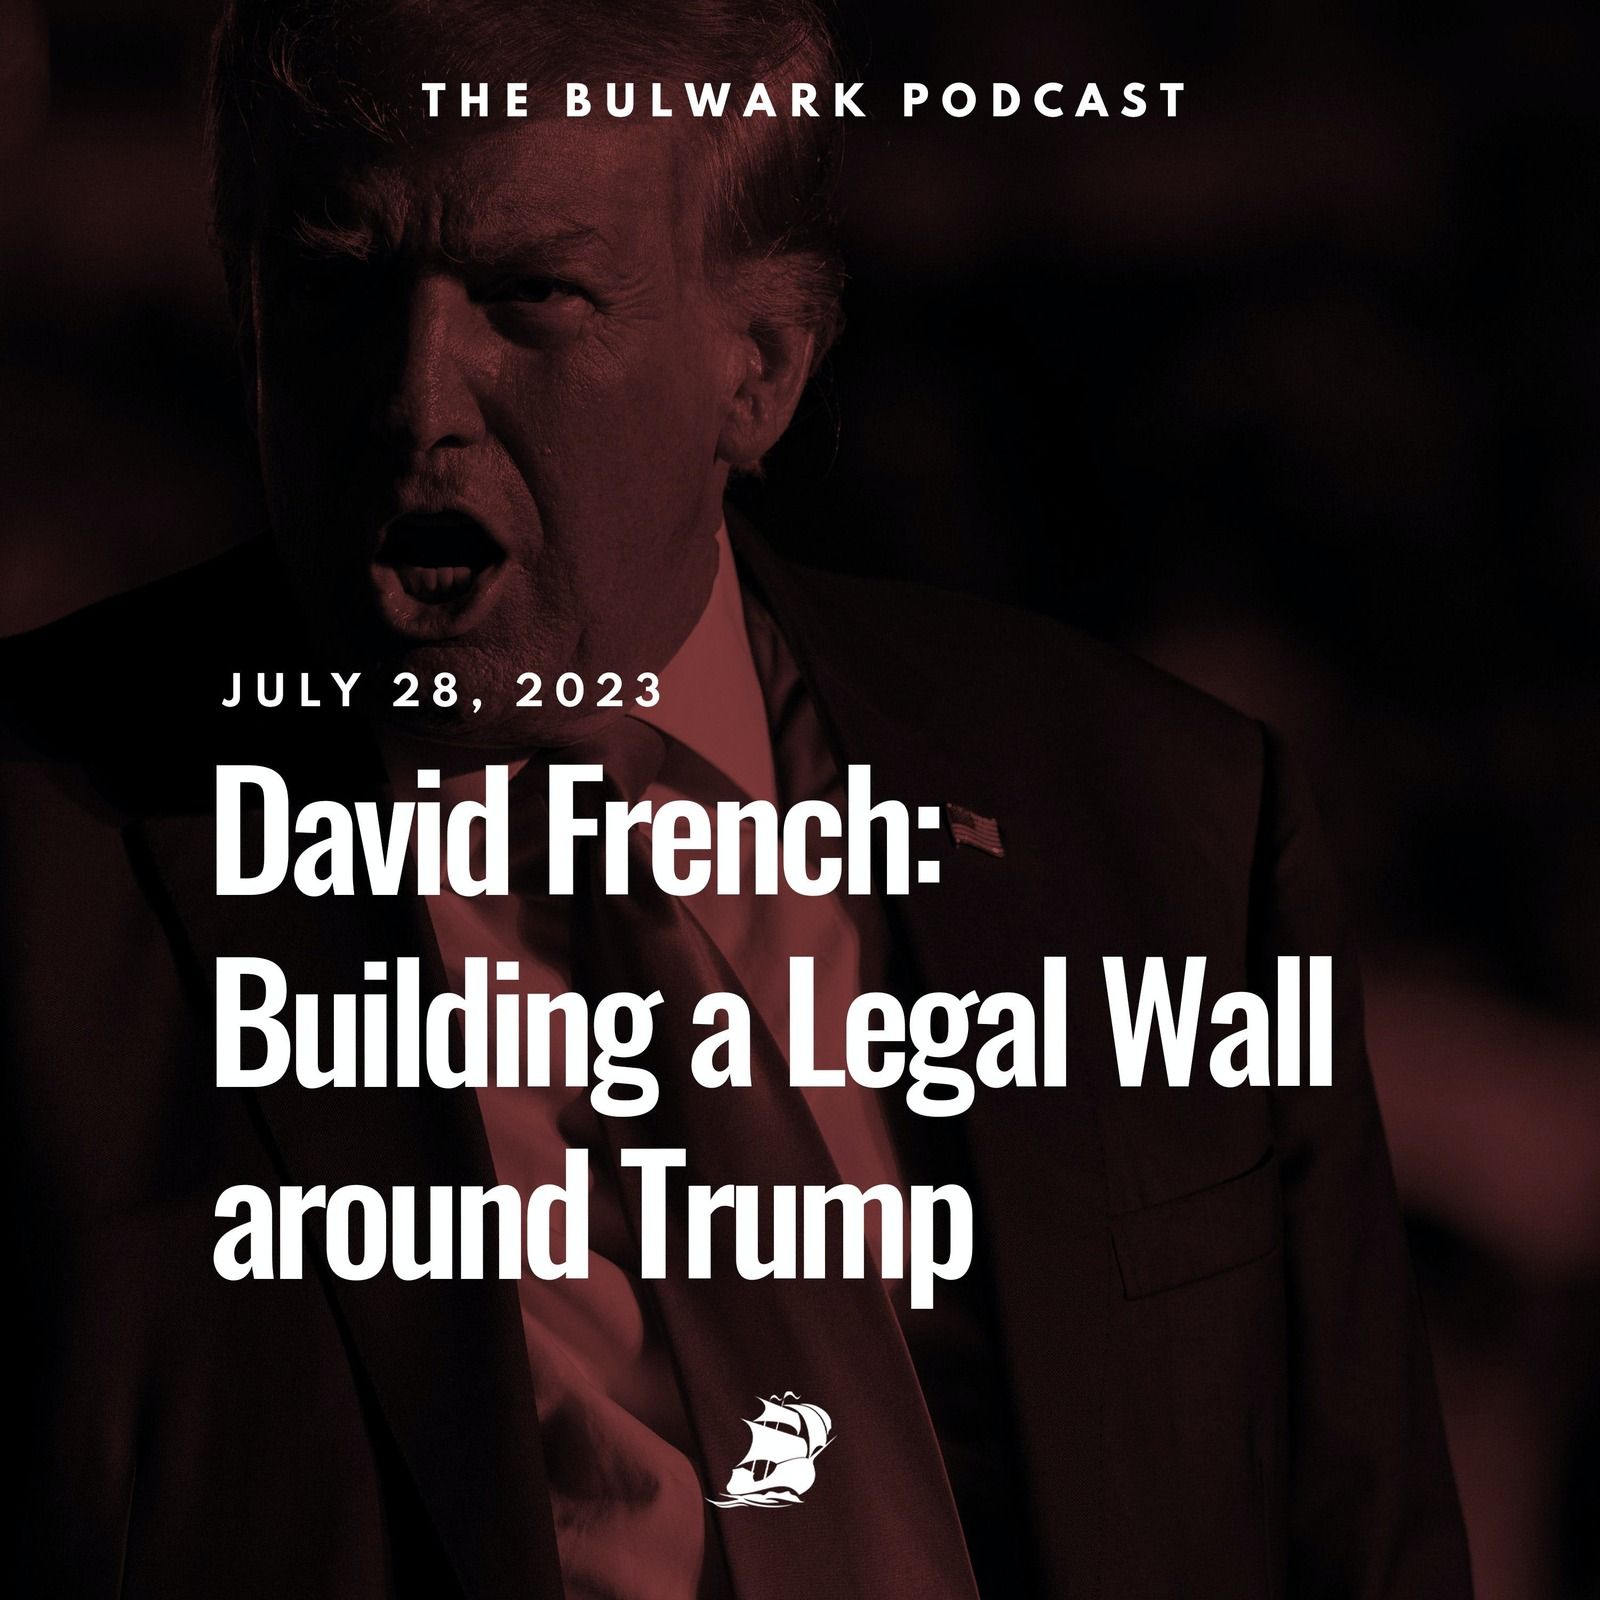 David French: Building a Legal Wall around Trump